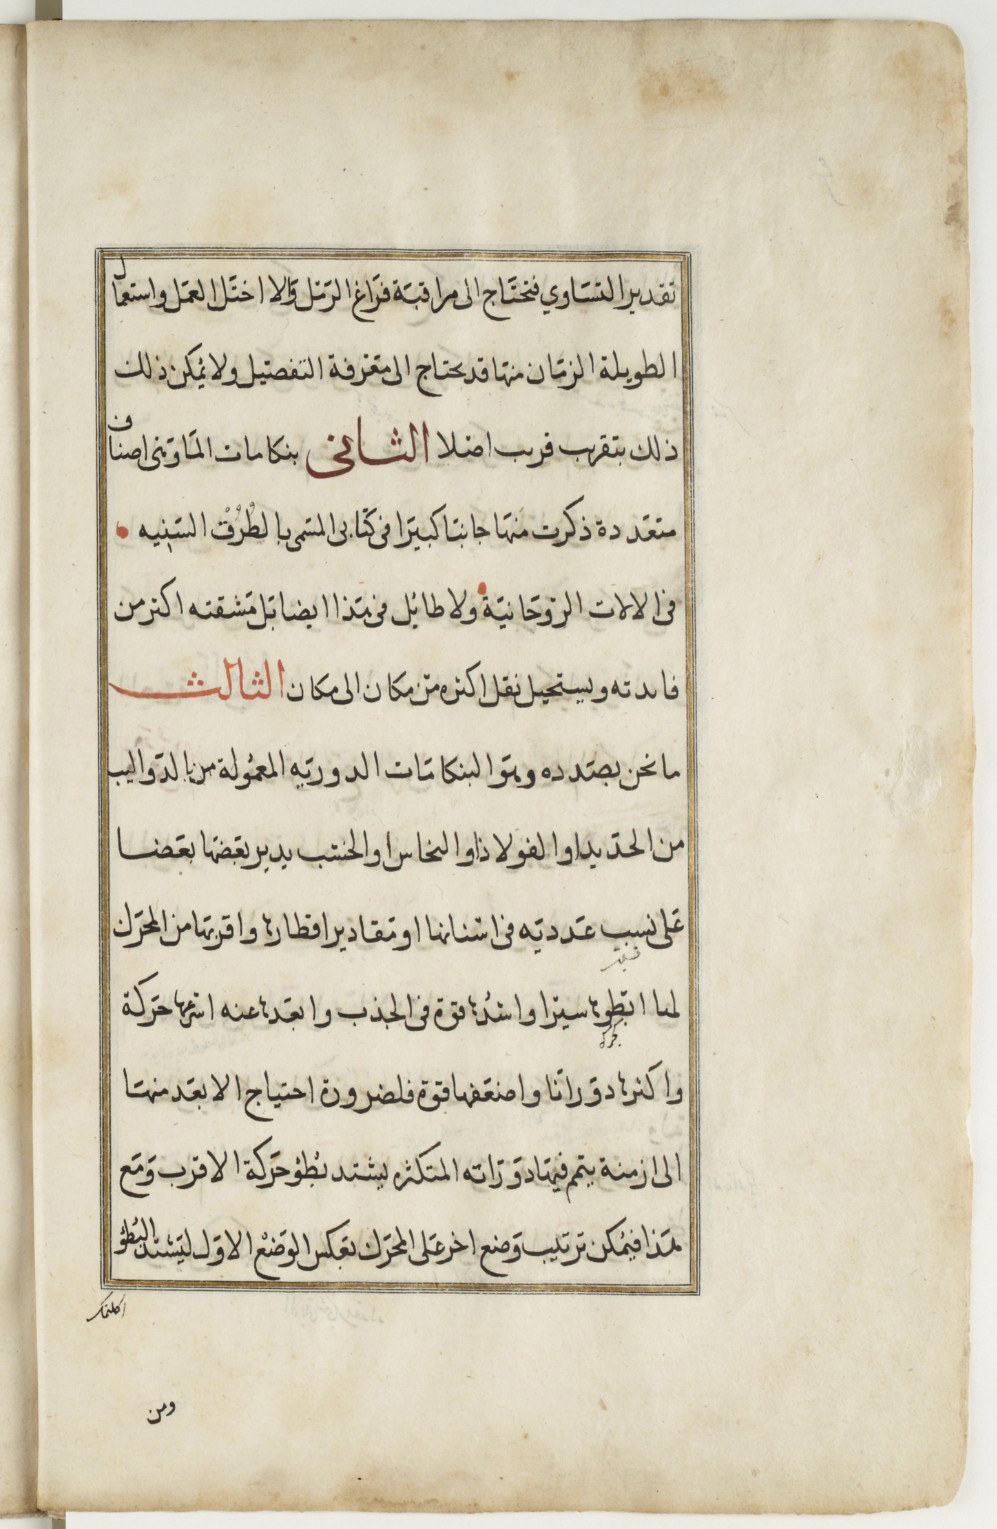 Manuscript page in the Naskh style with emphasis in the red Thuluth style
